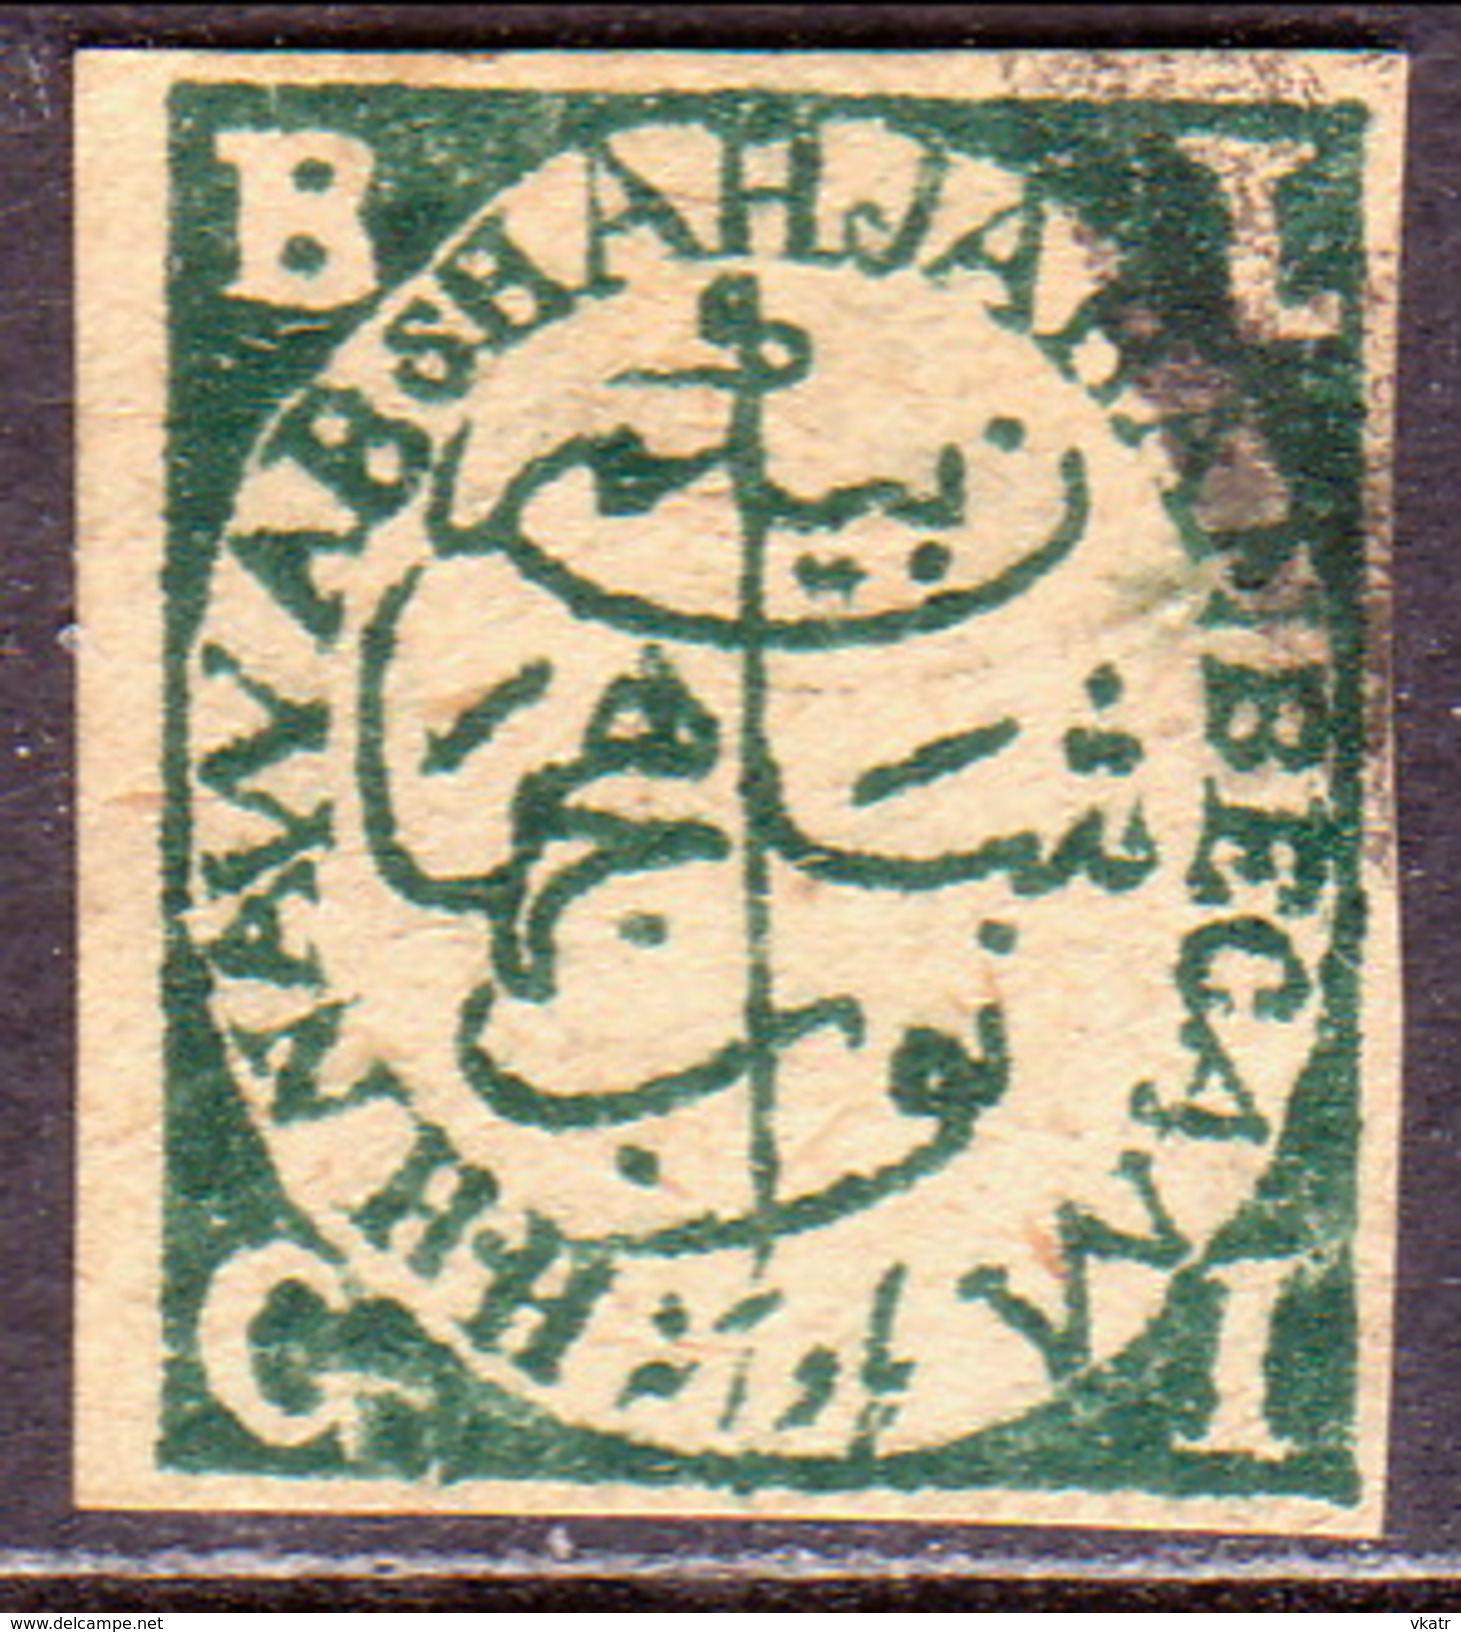 INDIA BHOPAL 1894 SG #61 ¼a Used Wove Paper "G" In Left Lower Corner Imperf - Bhopal